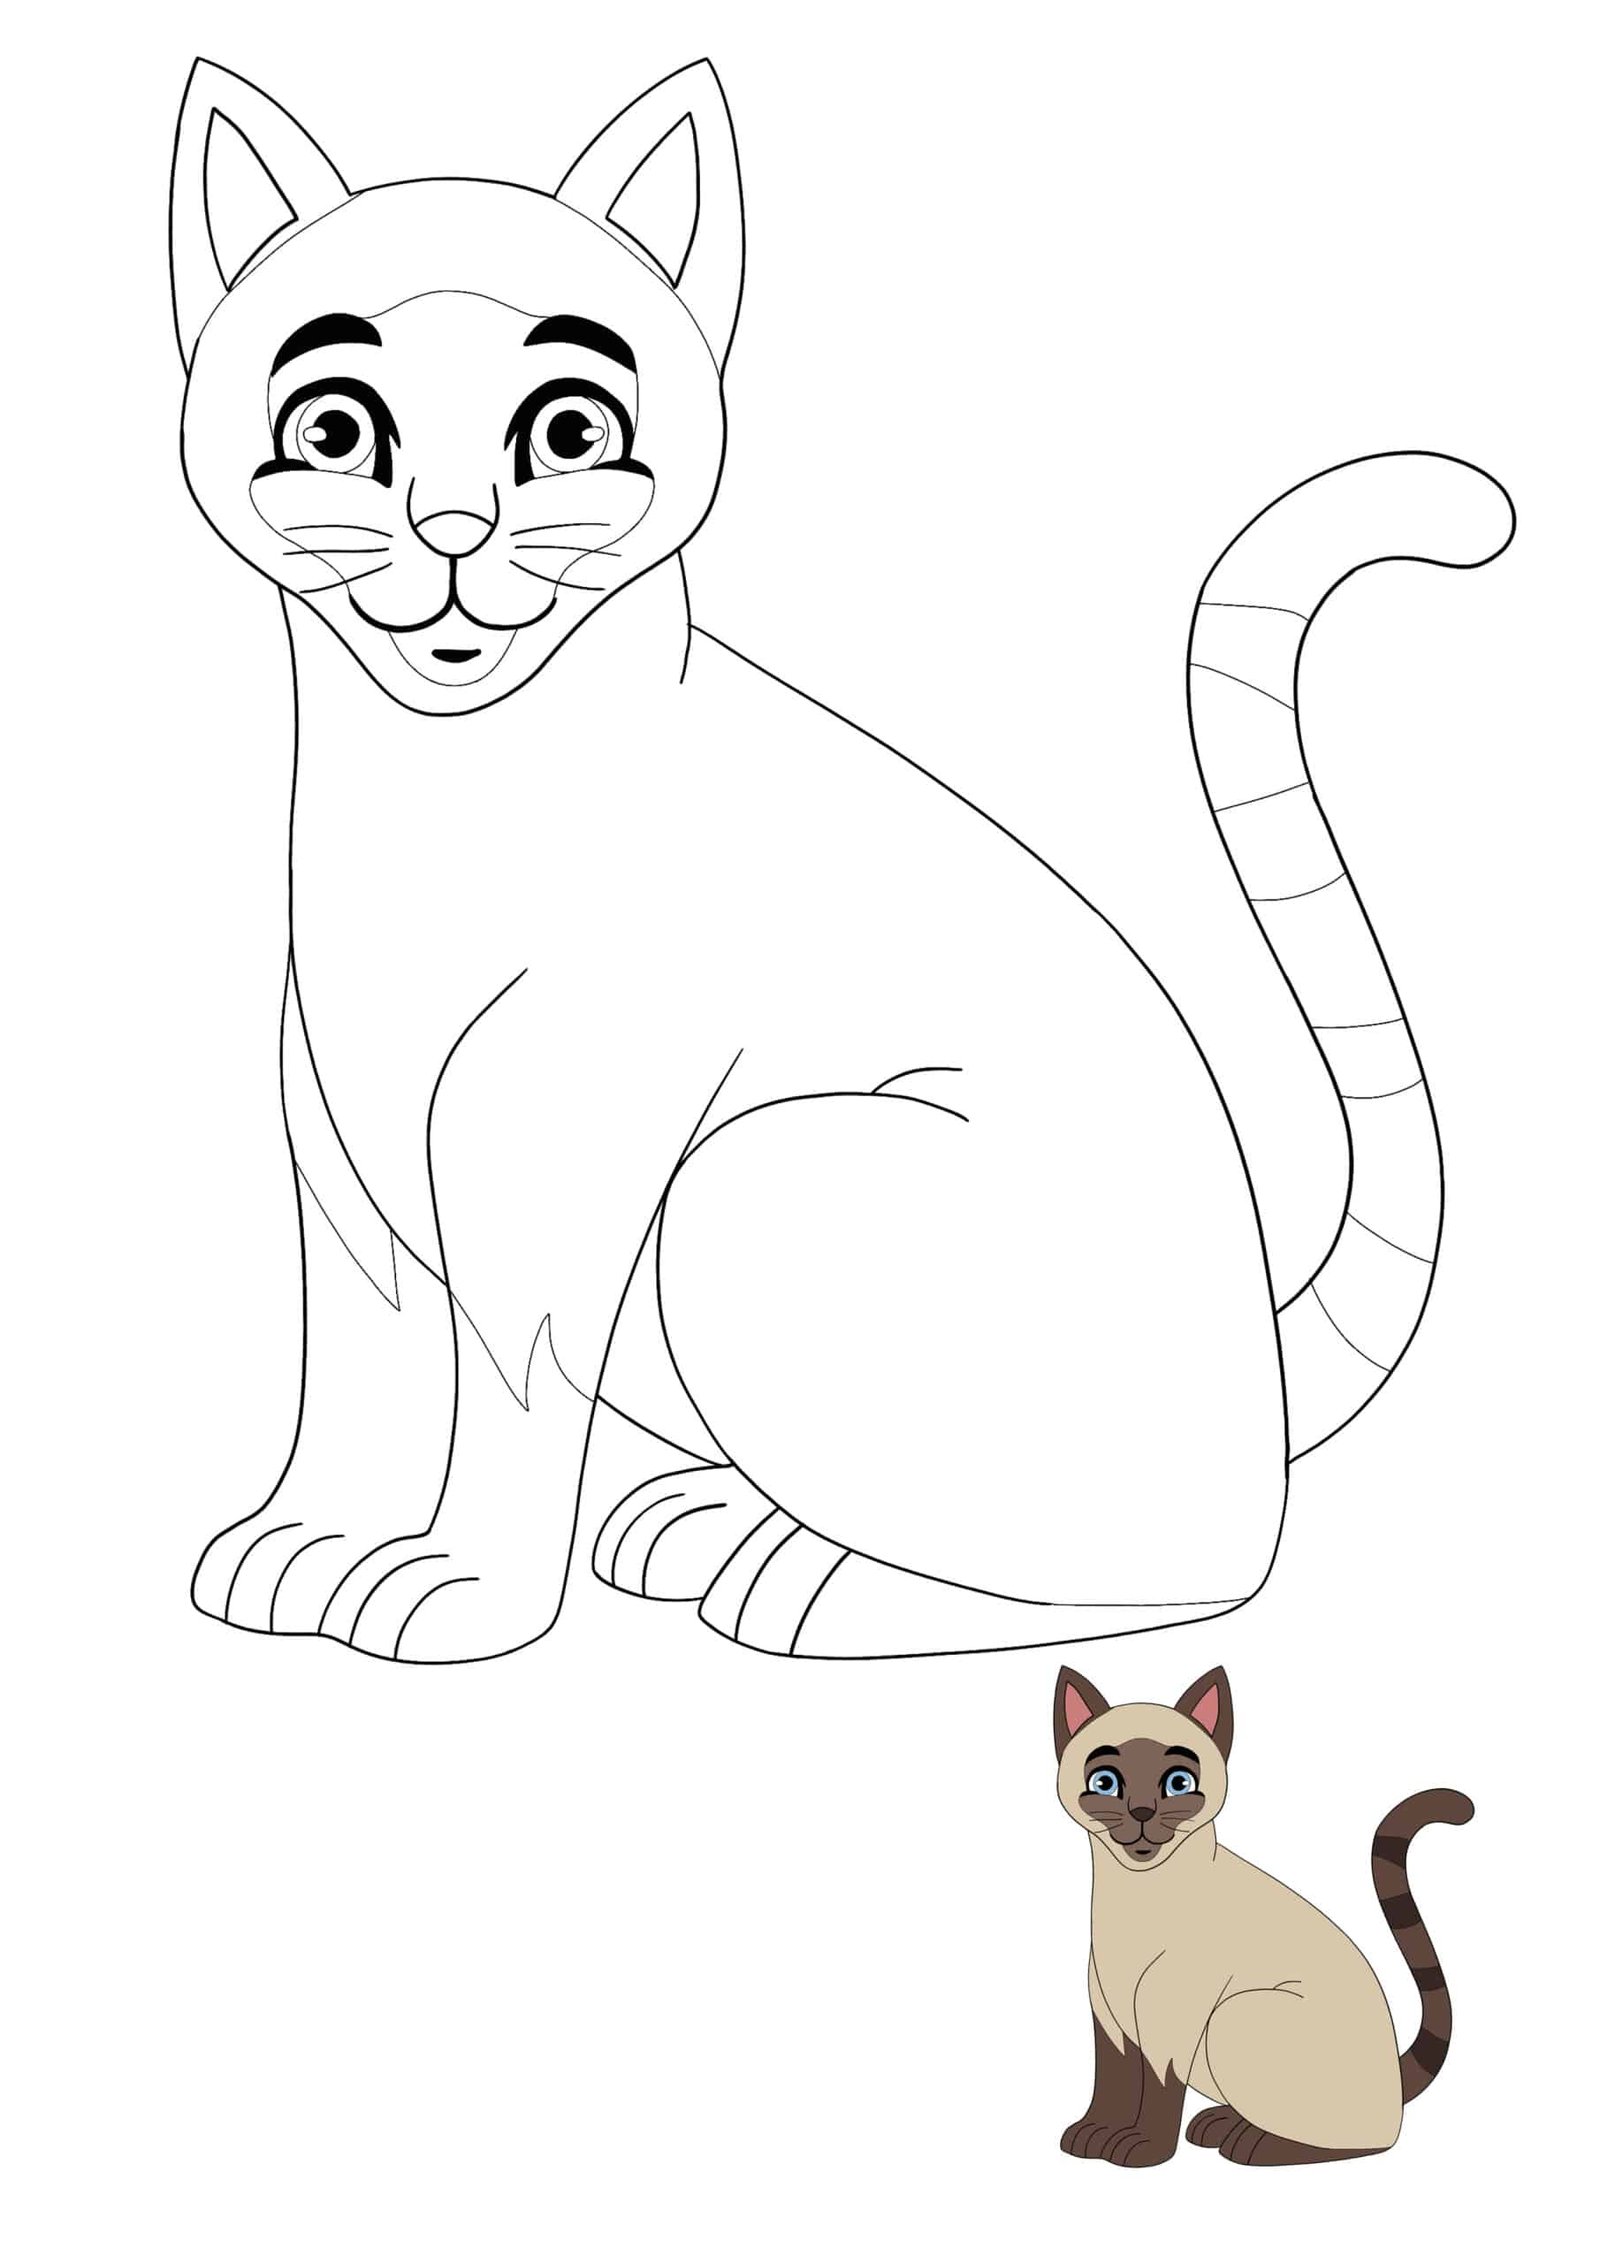 Siamese Cat coloring page for kids